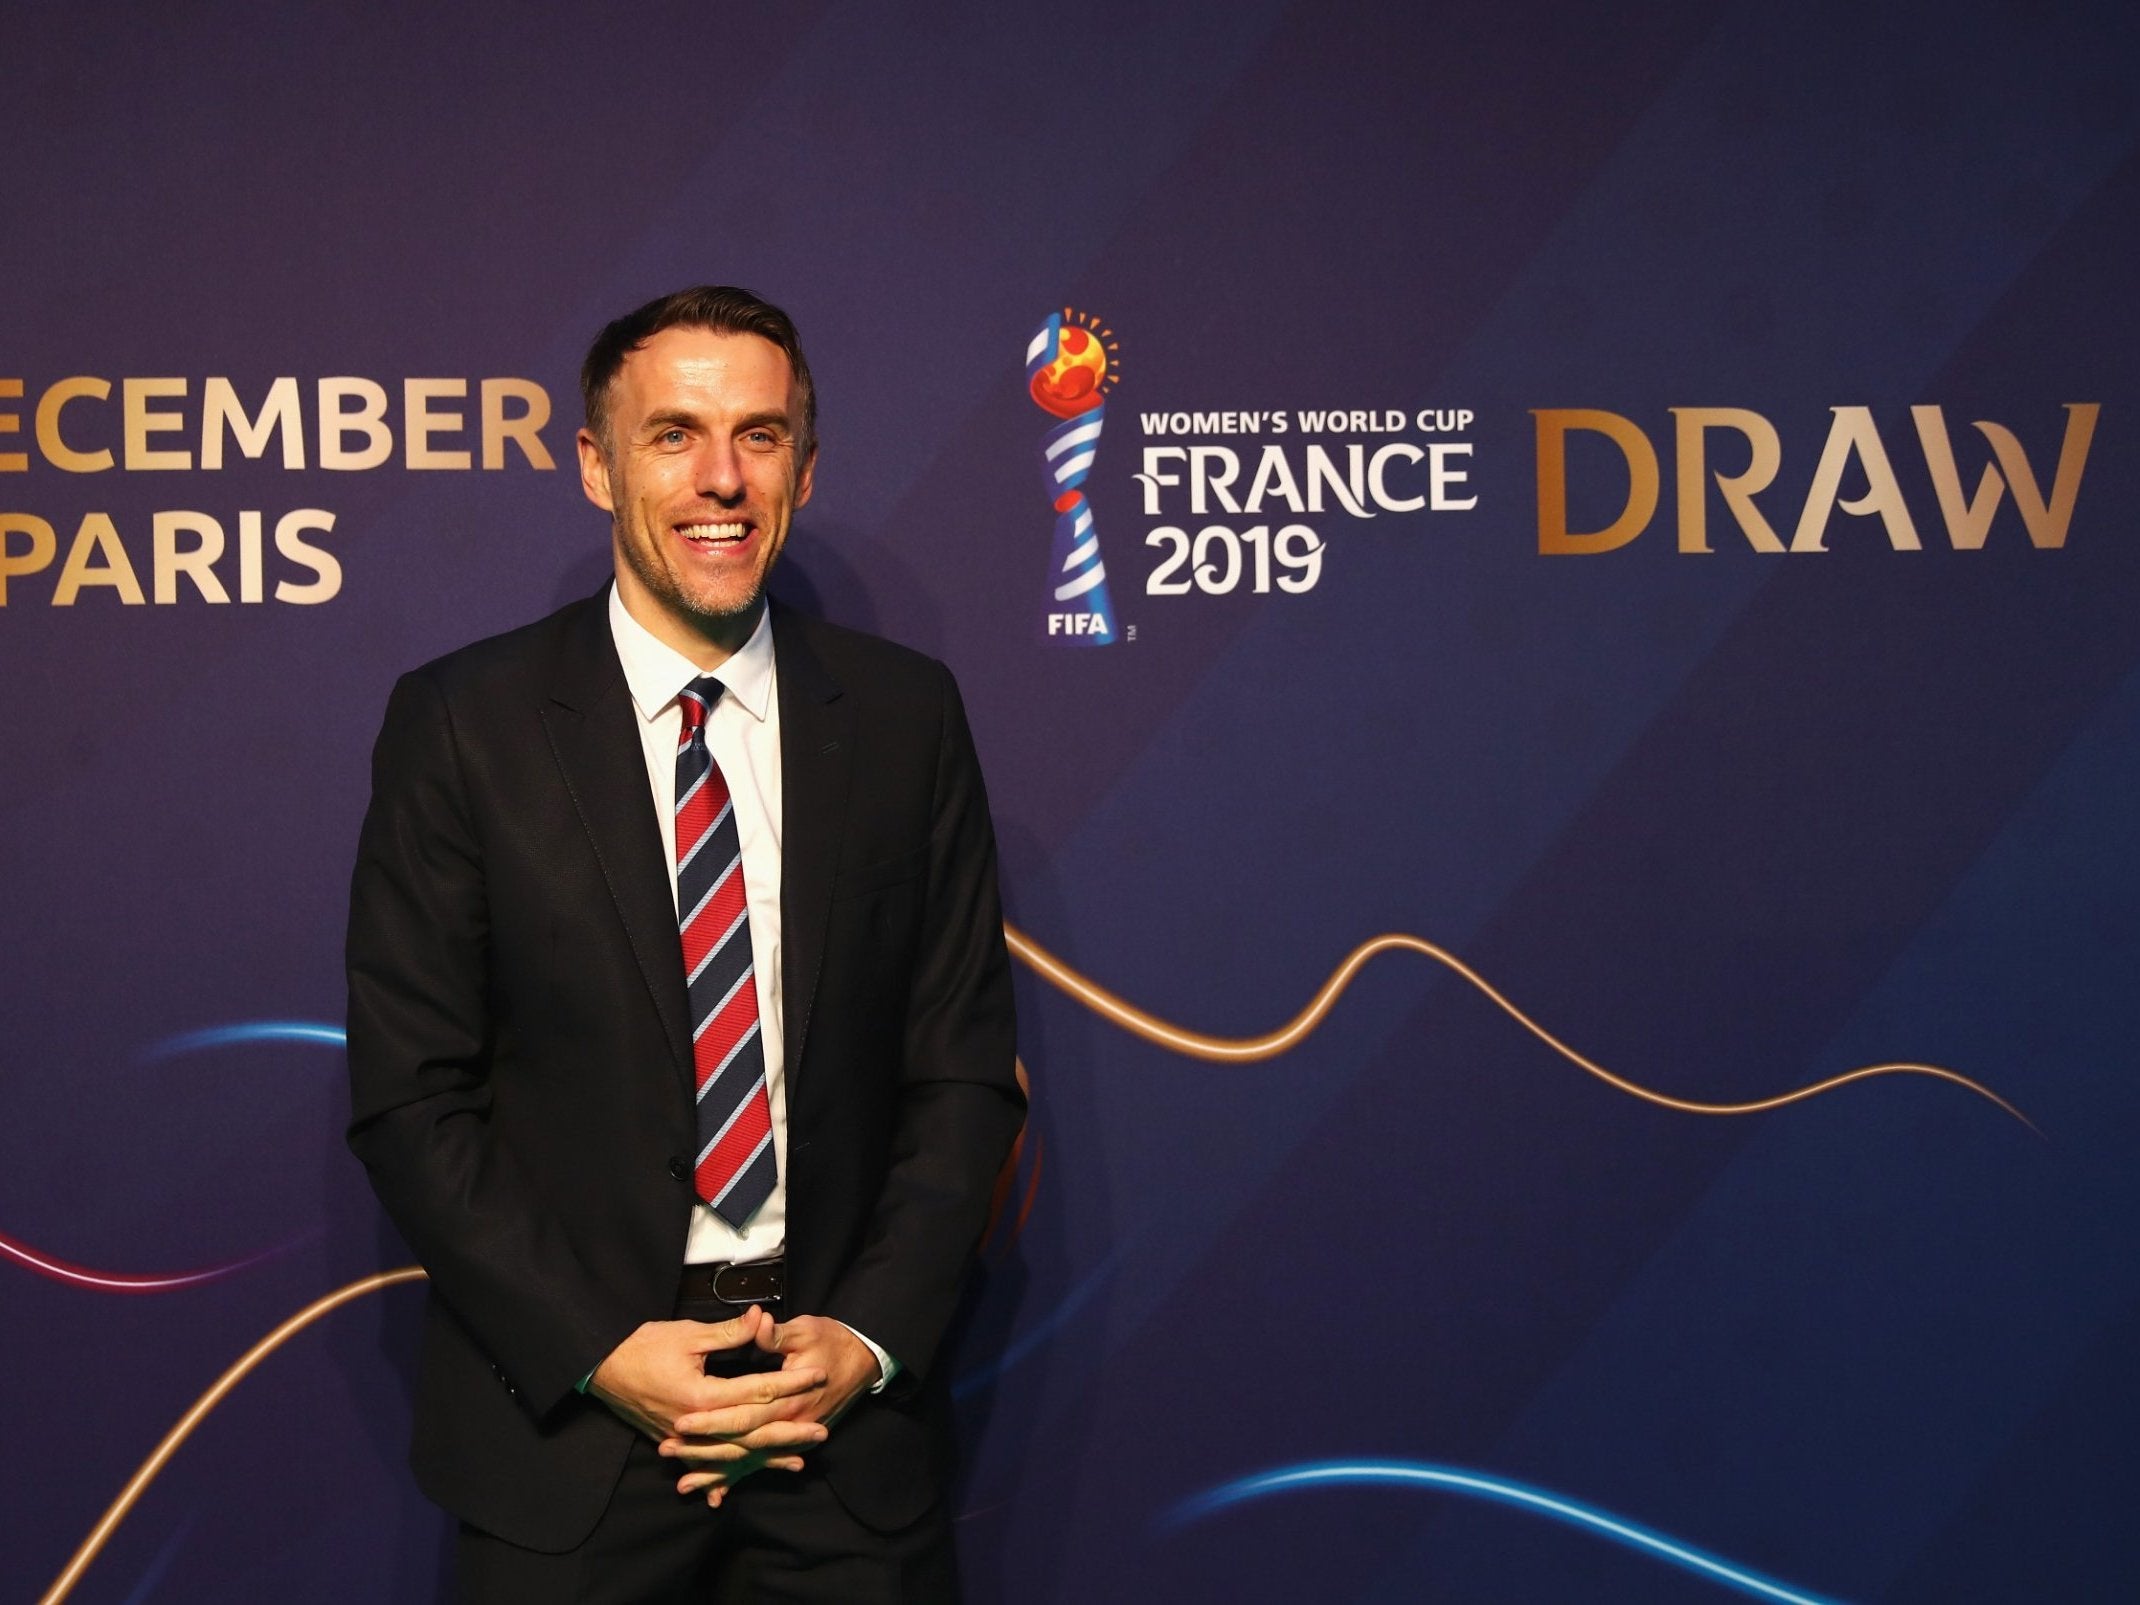 Phil Neville attended the World Cup draw in Paris